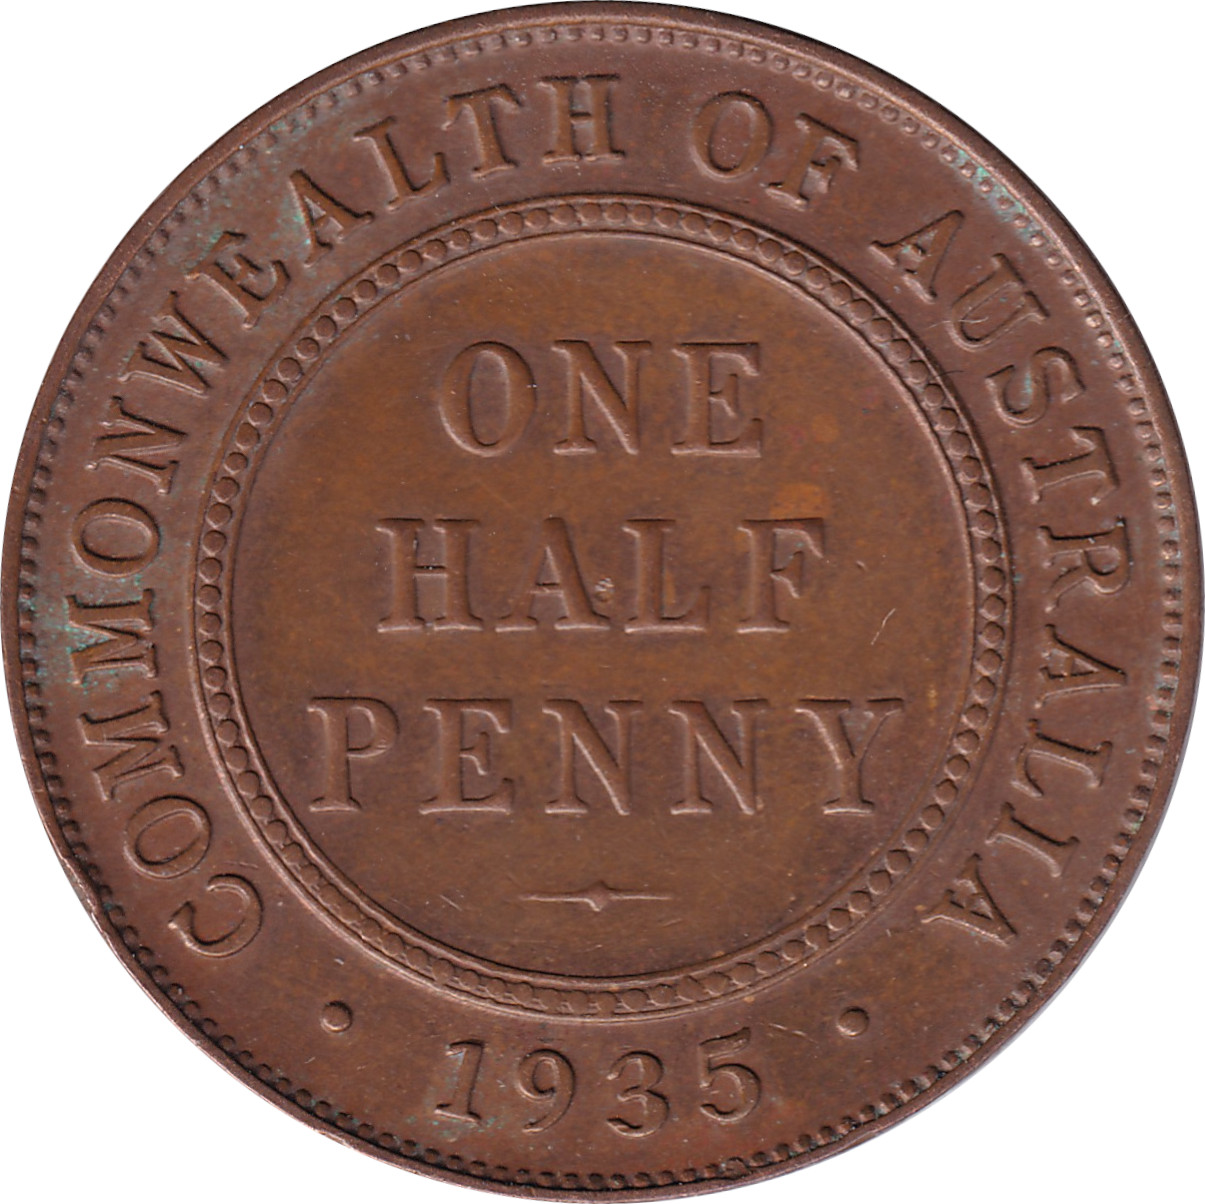 1/2 penny - Georges V